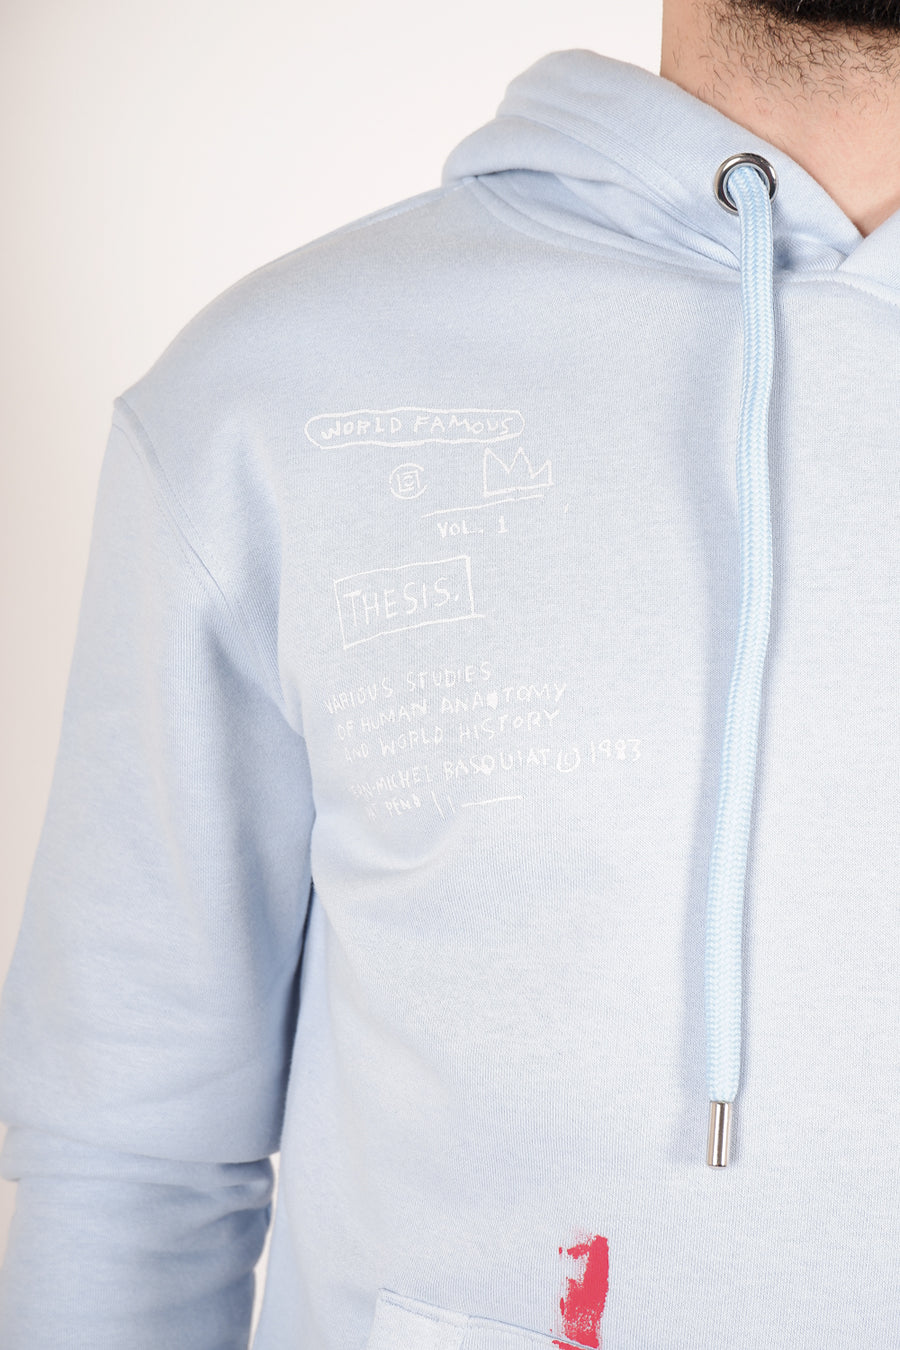 Buy the ABE Dime Hoodie in Light Blue at Intro. Spend £50 for free UK delivery. Official stockists. We ship worldwide.